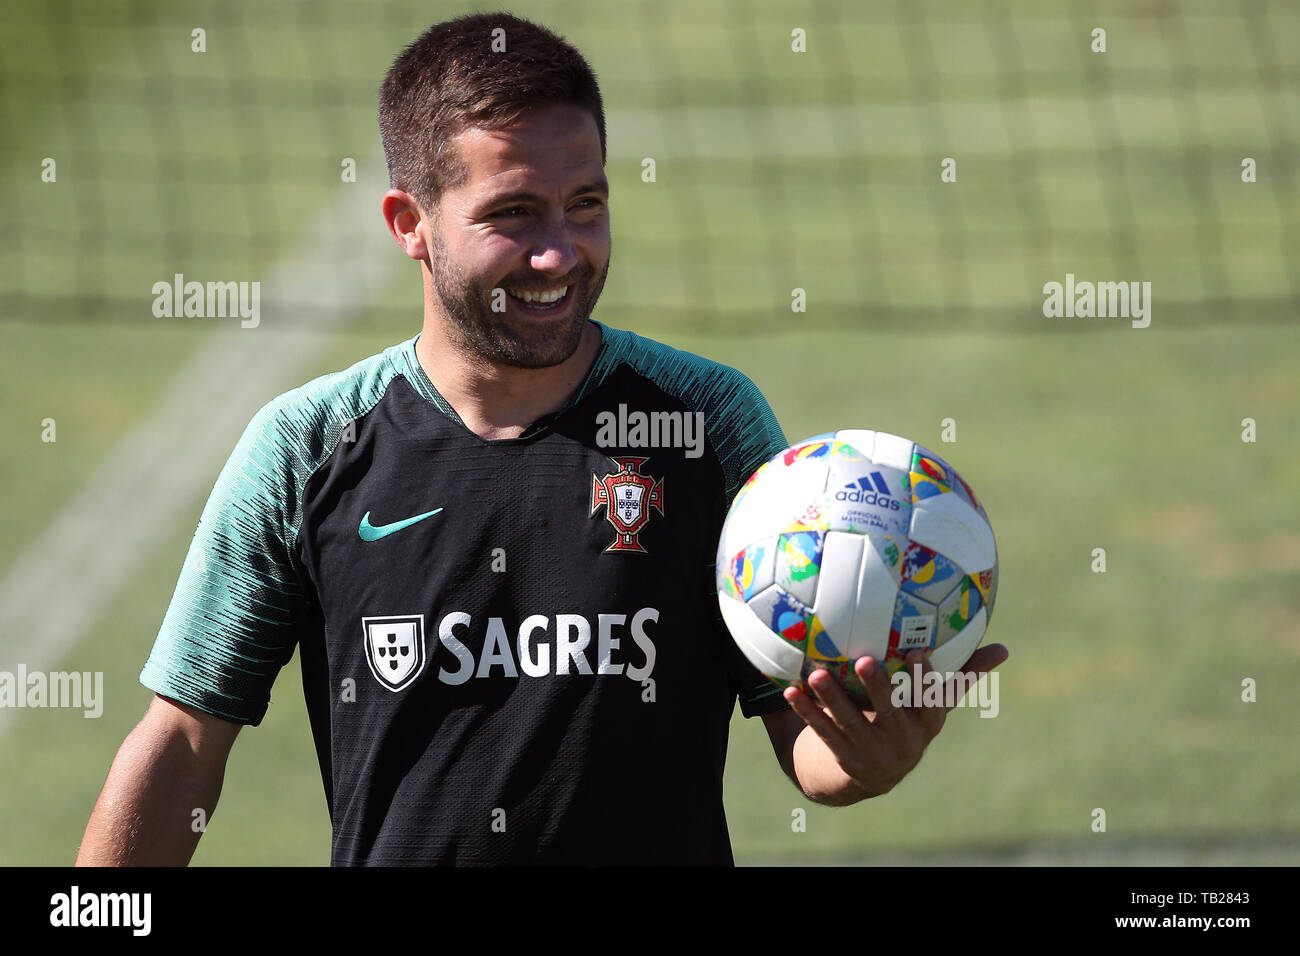 Oeiras. 29th May, 2019. Portugal's Joao Moutinho attends a training session in Oeiras, Portugal, May 29, 2019, as part of preparations for the final stage of the UEFA Nations League. Credit: Pedro Fiuza/Xinhua/Alamy Live News Stock Photo